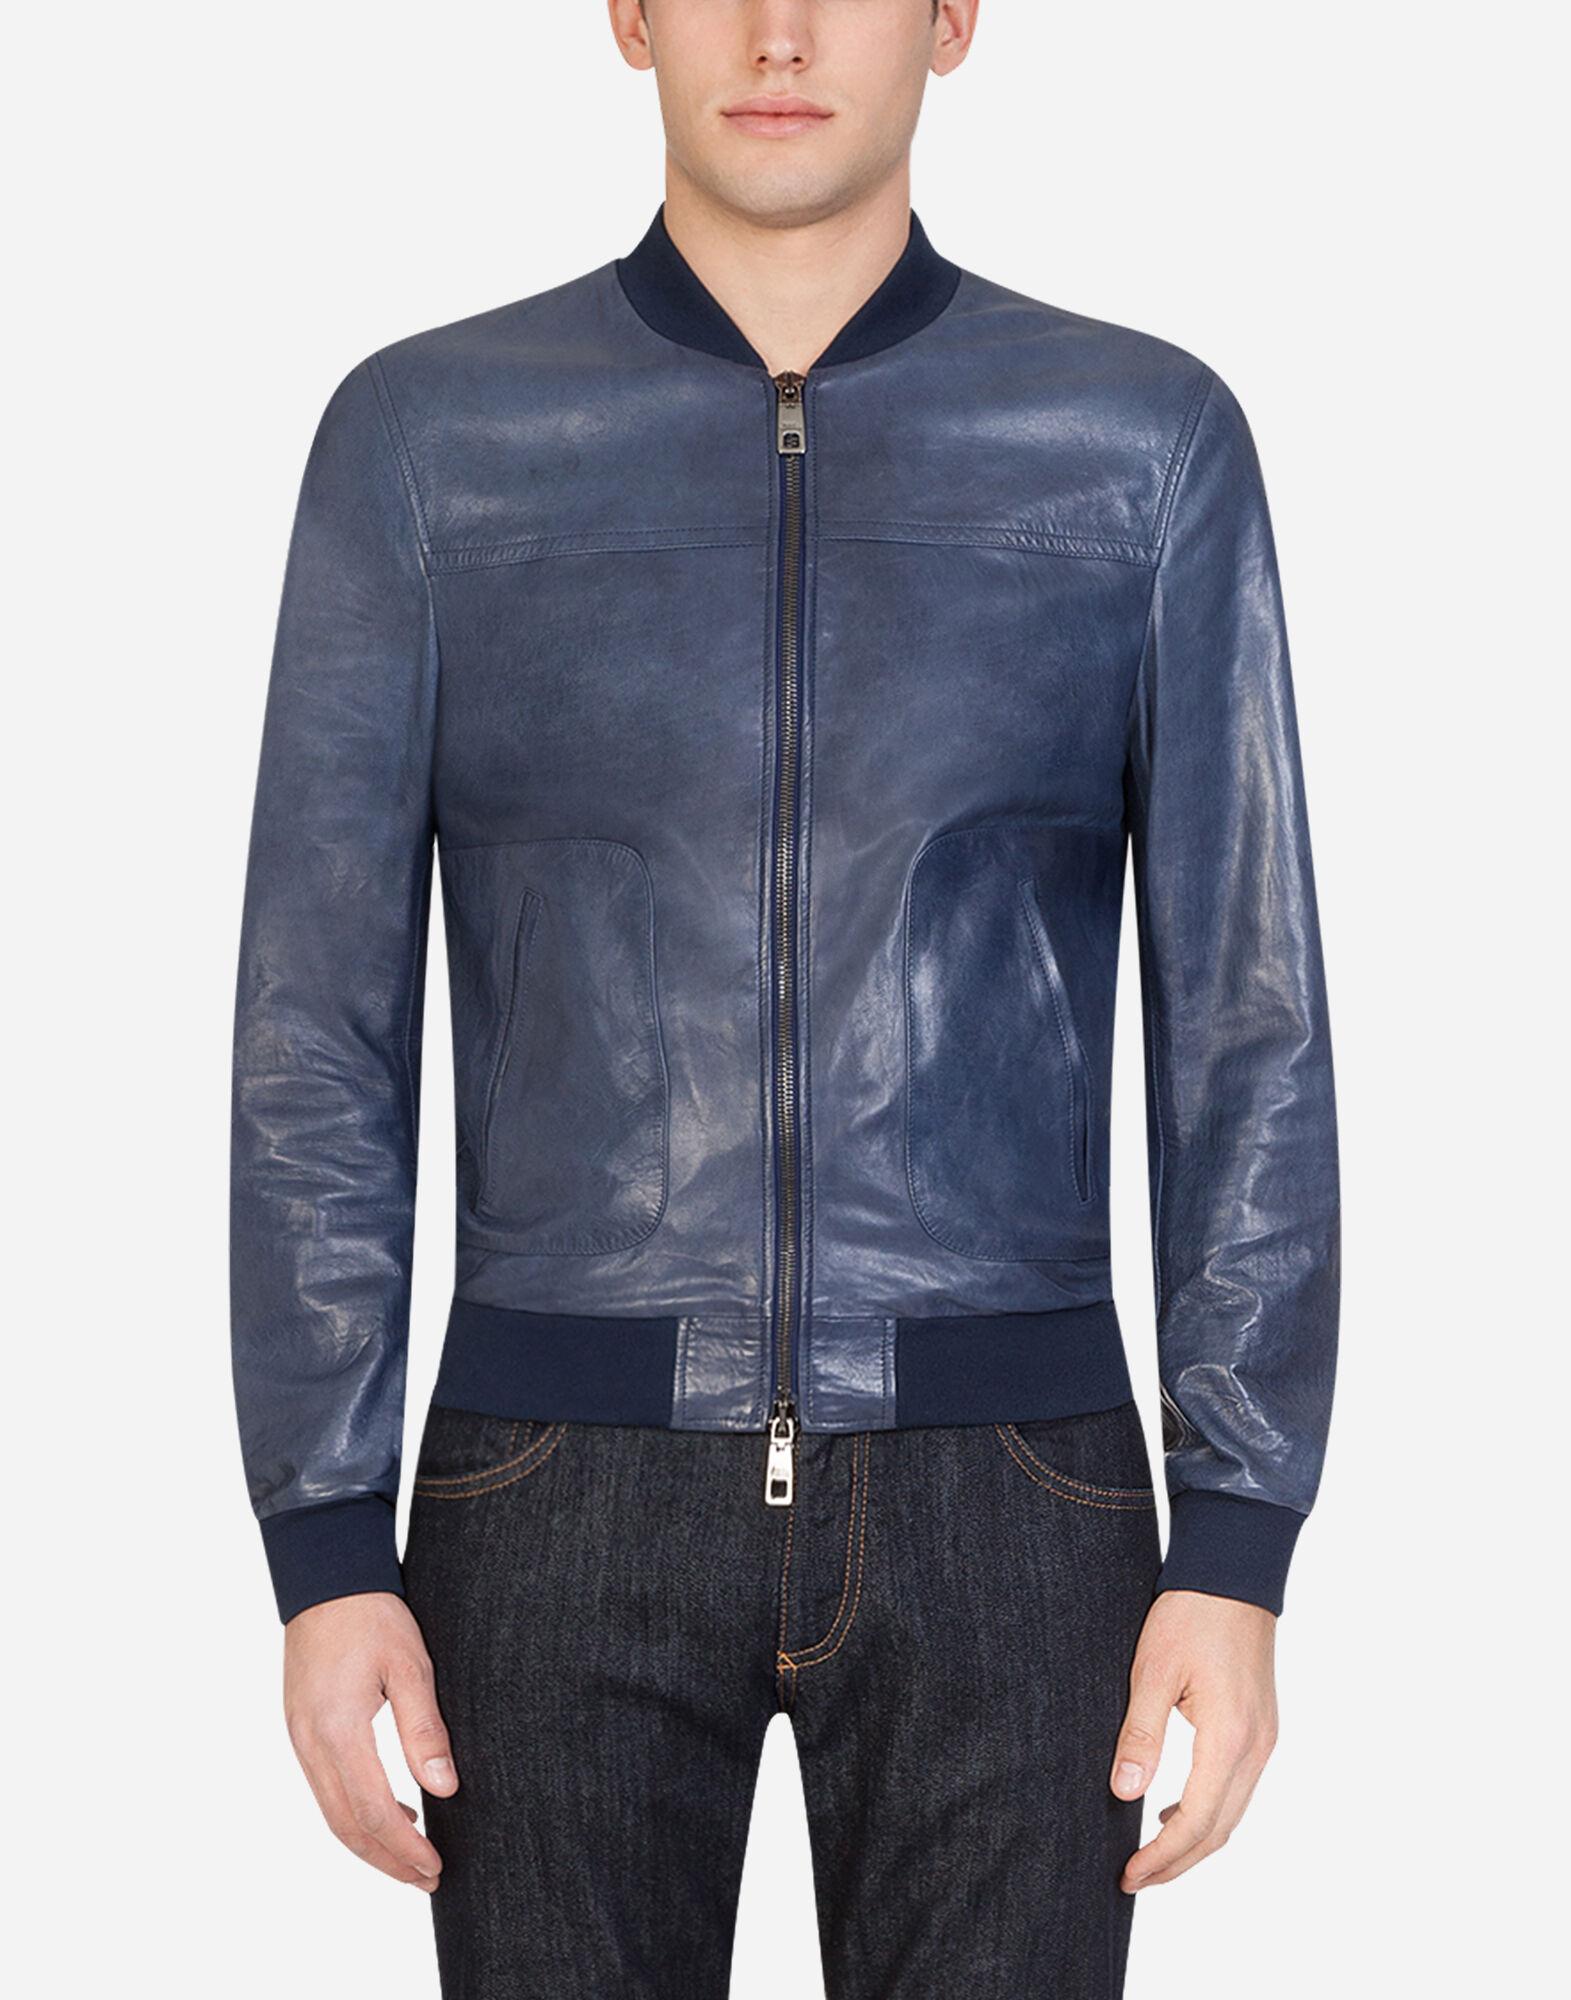 Dolce & Gabbana Leather Zip-up Jacket in Blue for Men - Lyst